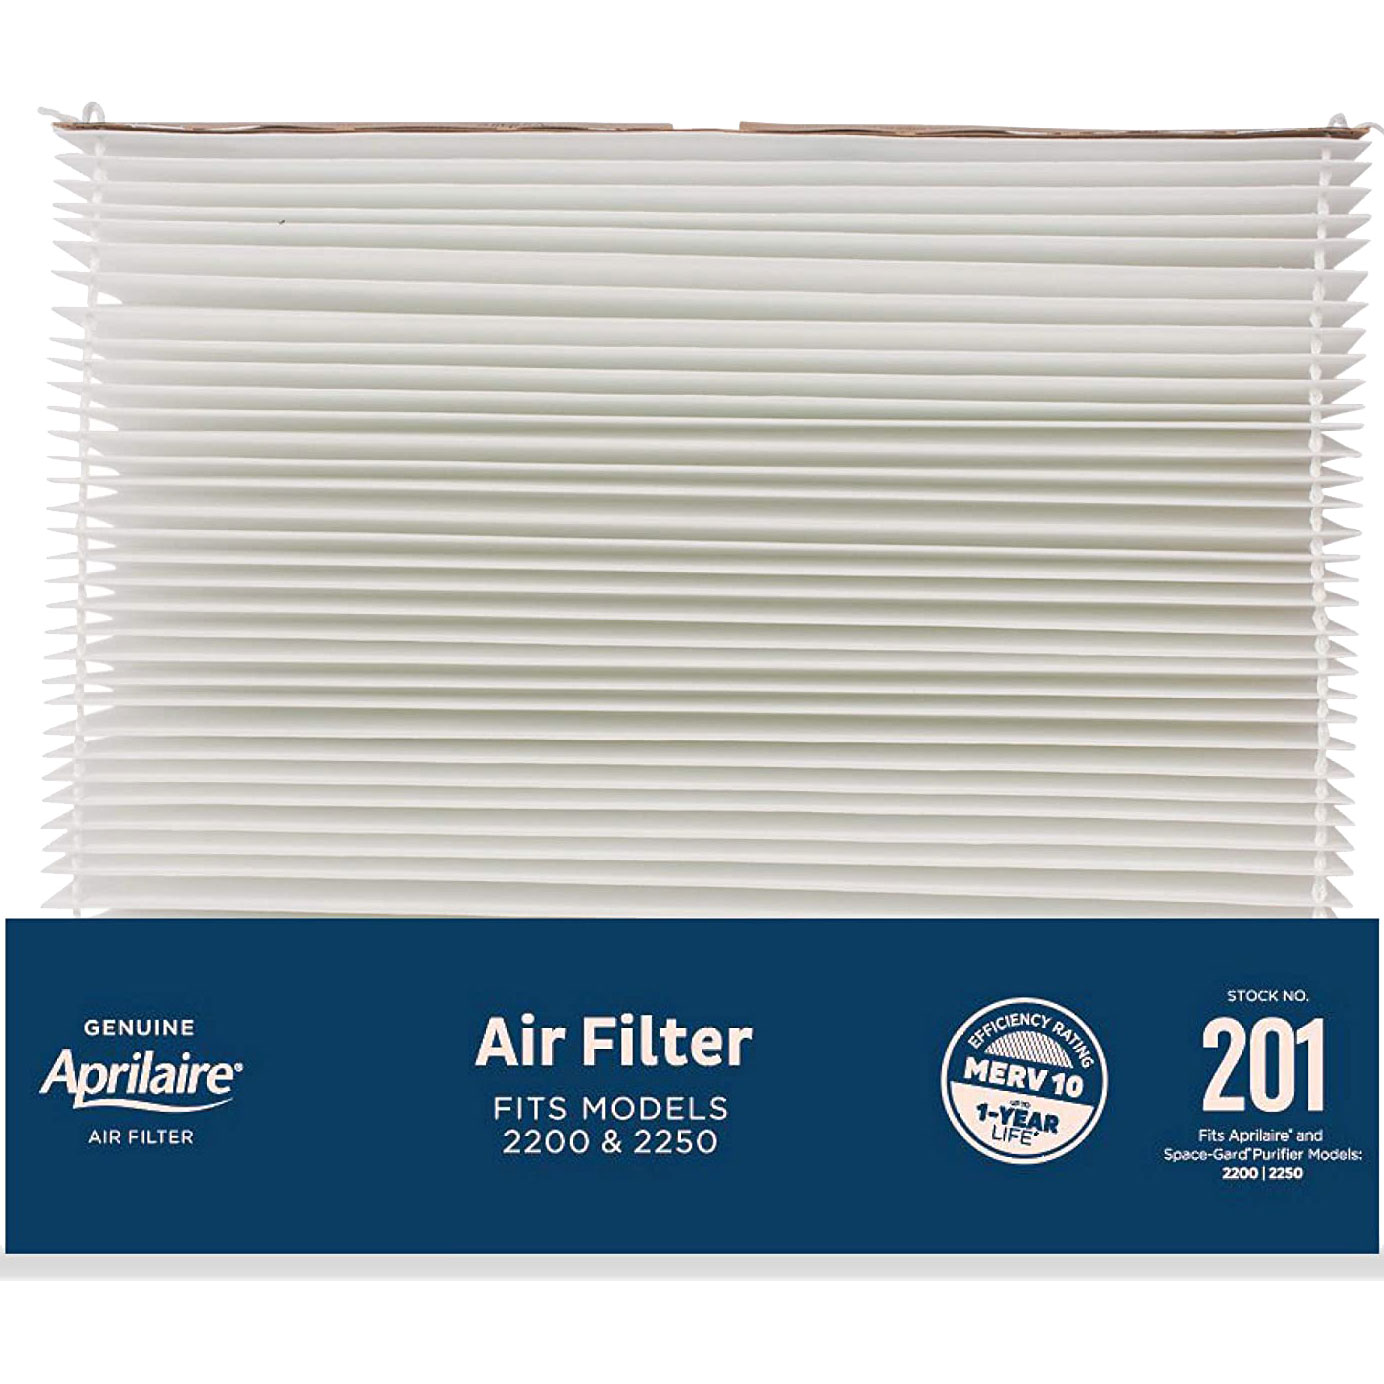 AprilAire 201 MERV 10 Air Filter for Whole-House Air Purifier Models 2